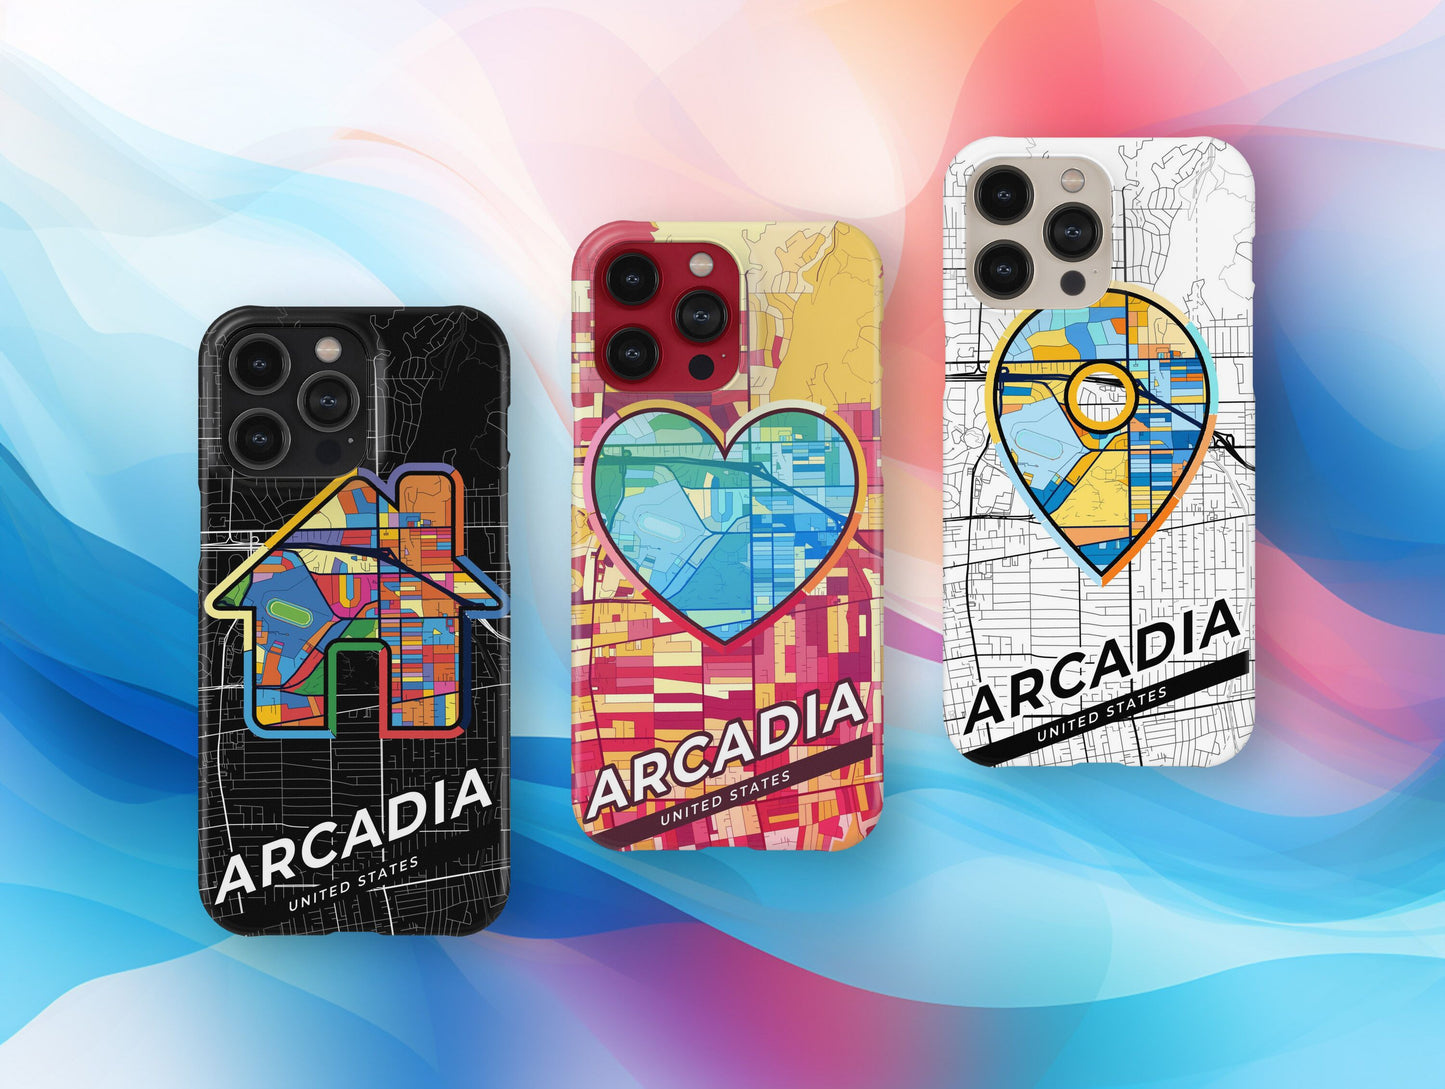 Arcadia California slim phone case with colorful icon. Birthday, wedding or housewarming gift. Couple match cases.